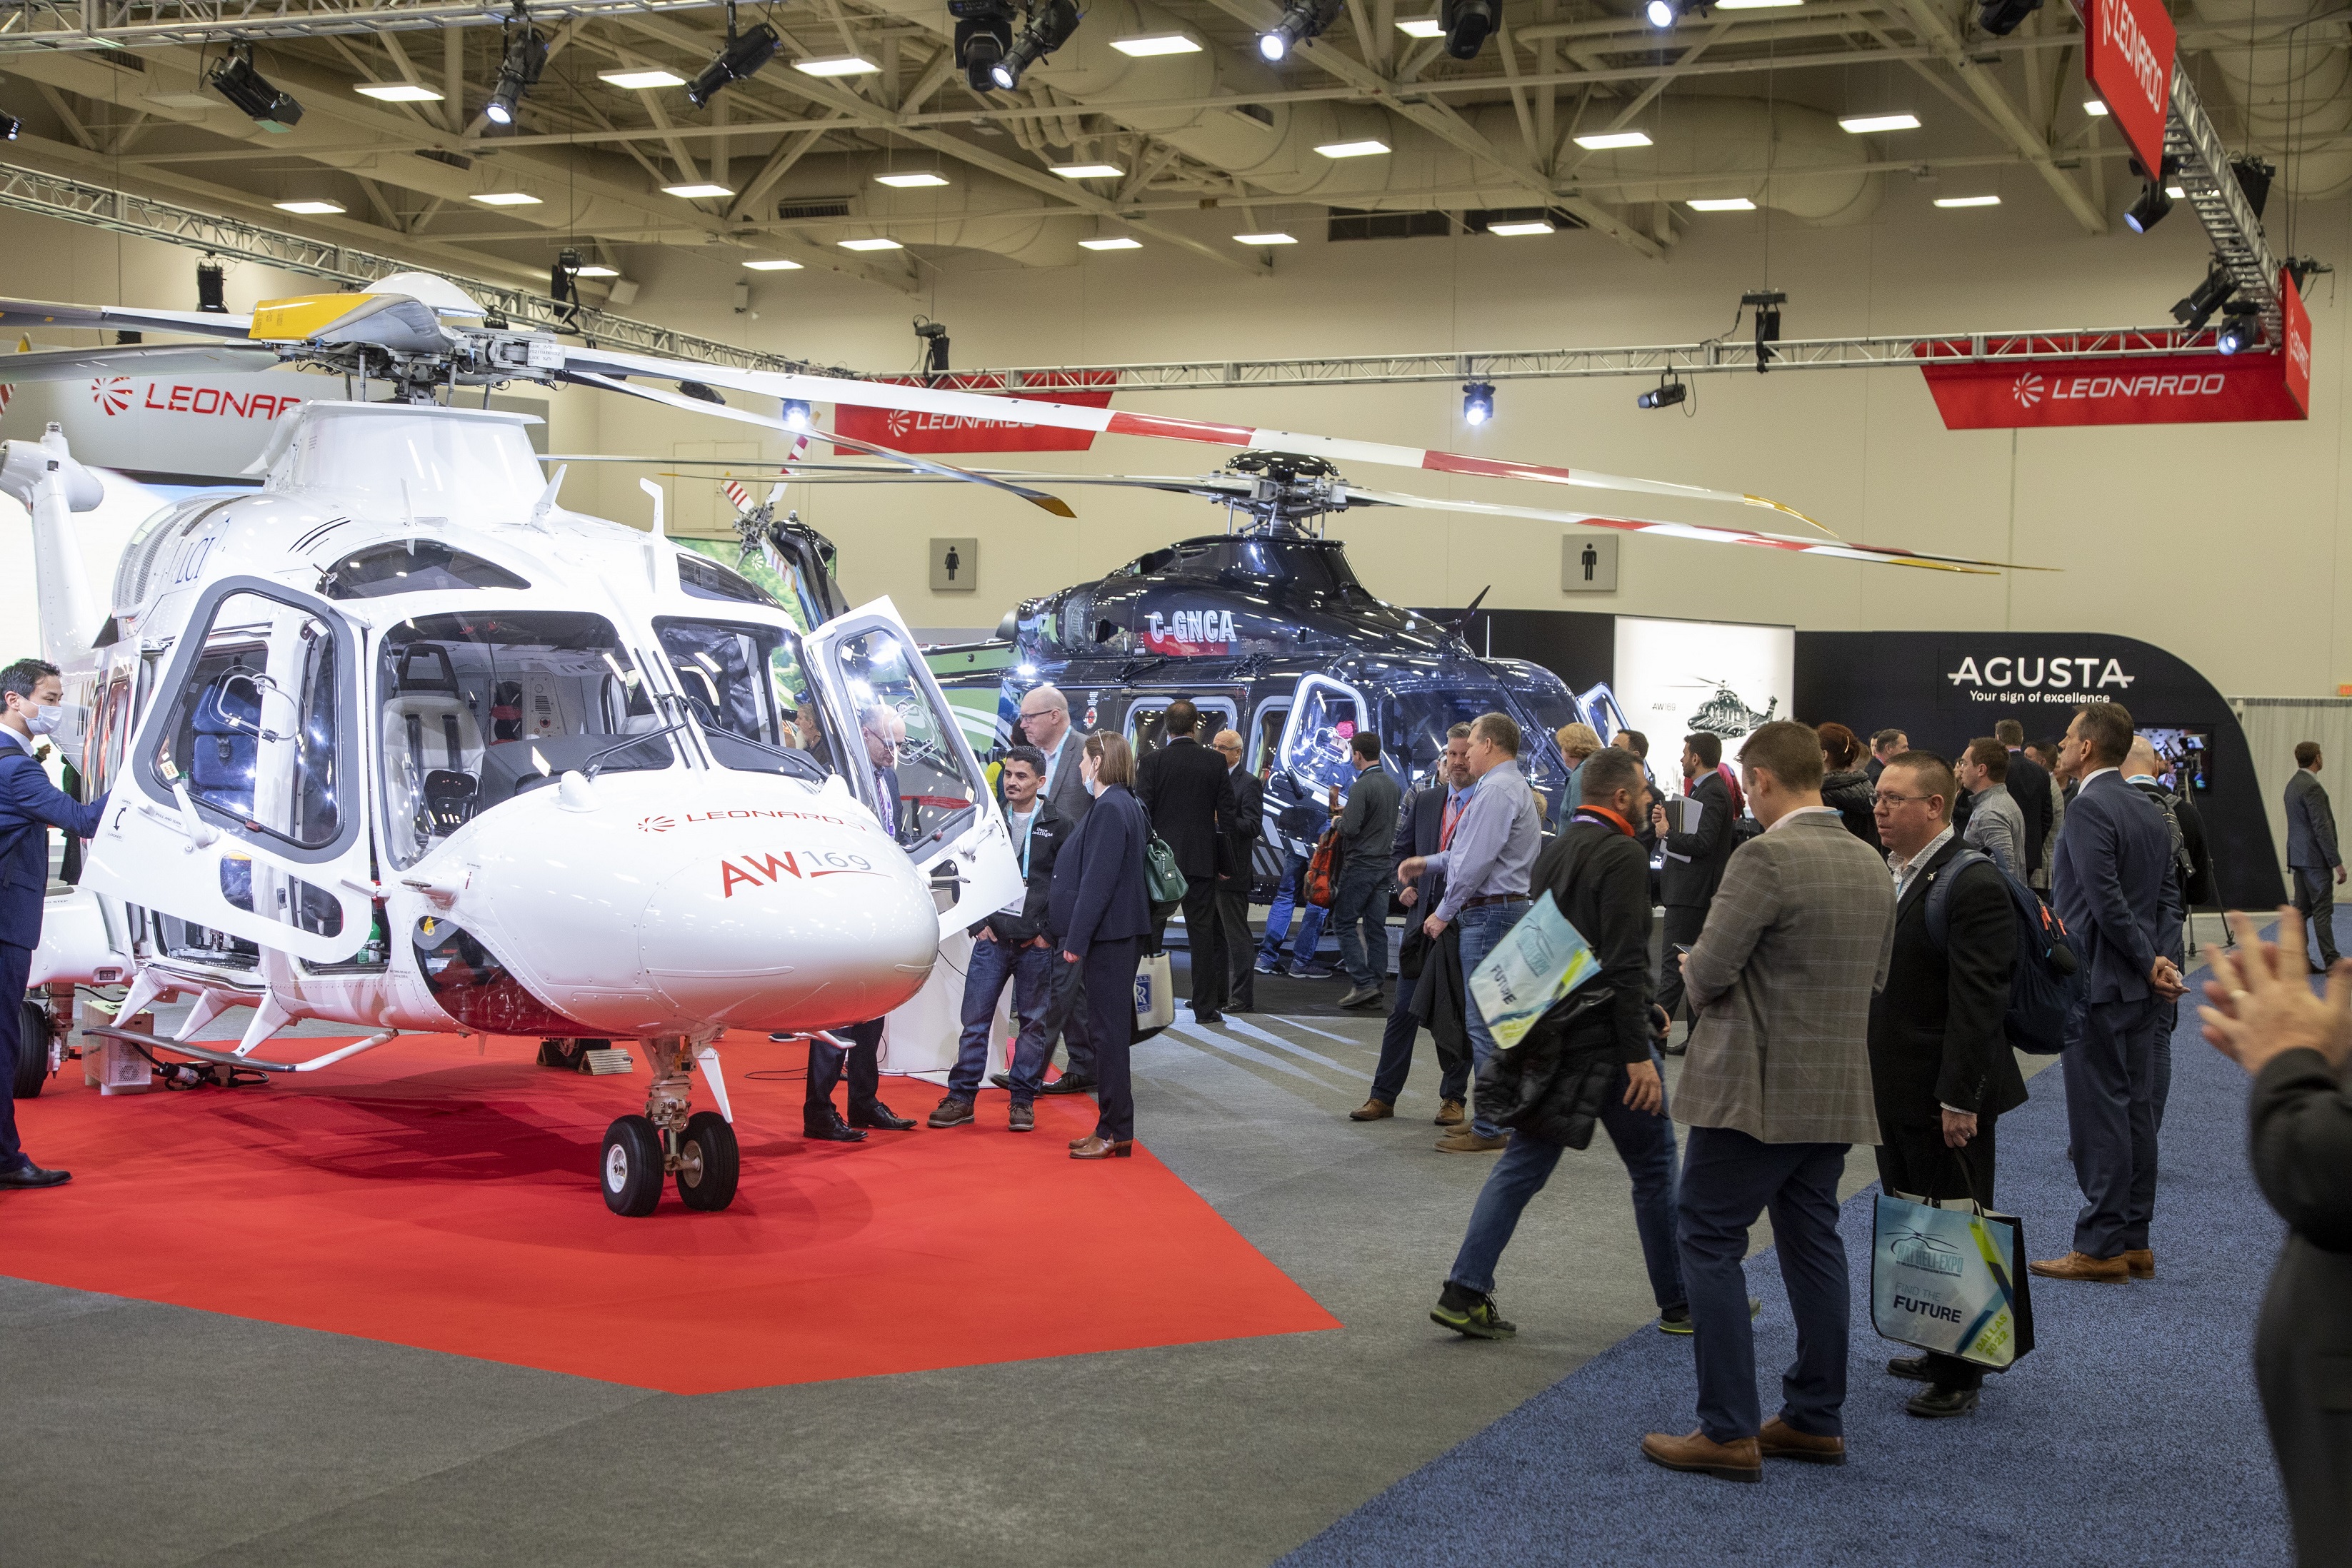 Leonardo Confirms Its Strong Position in the Commercial Helicopter Market